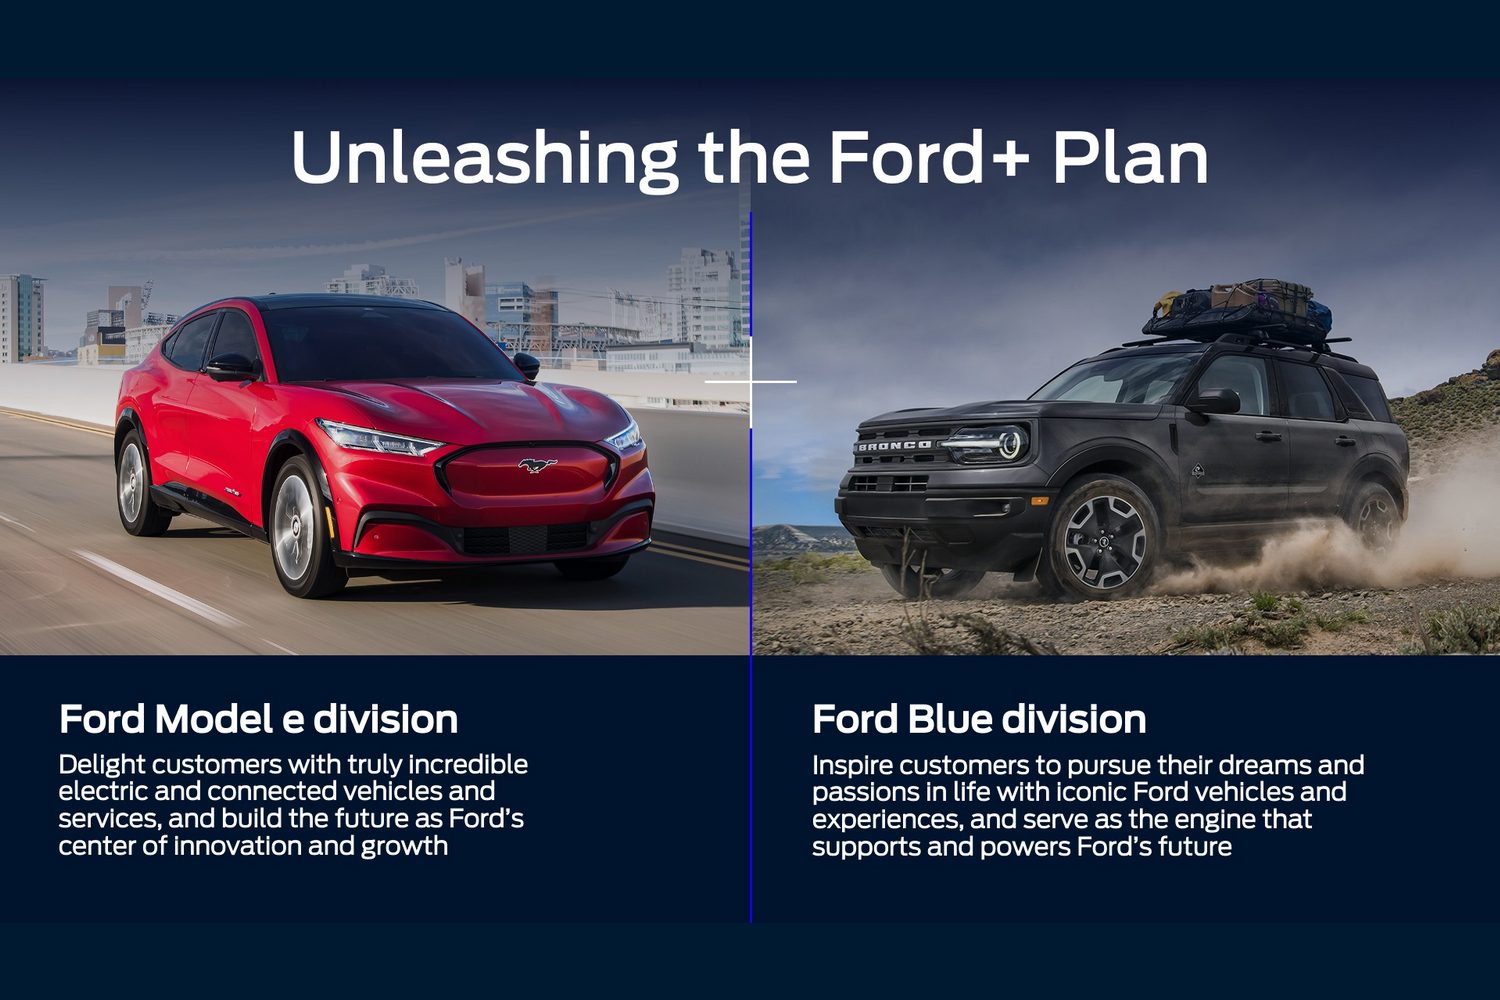 Ford will divide itself in two